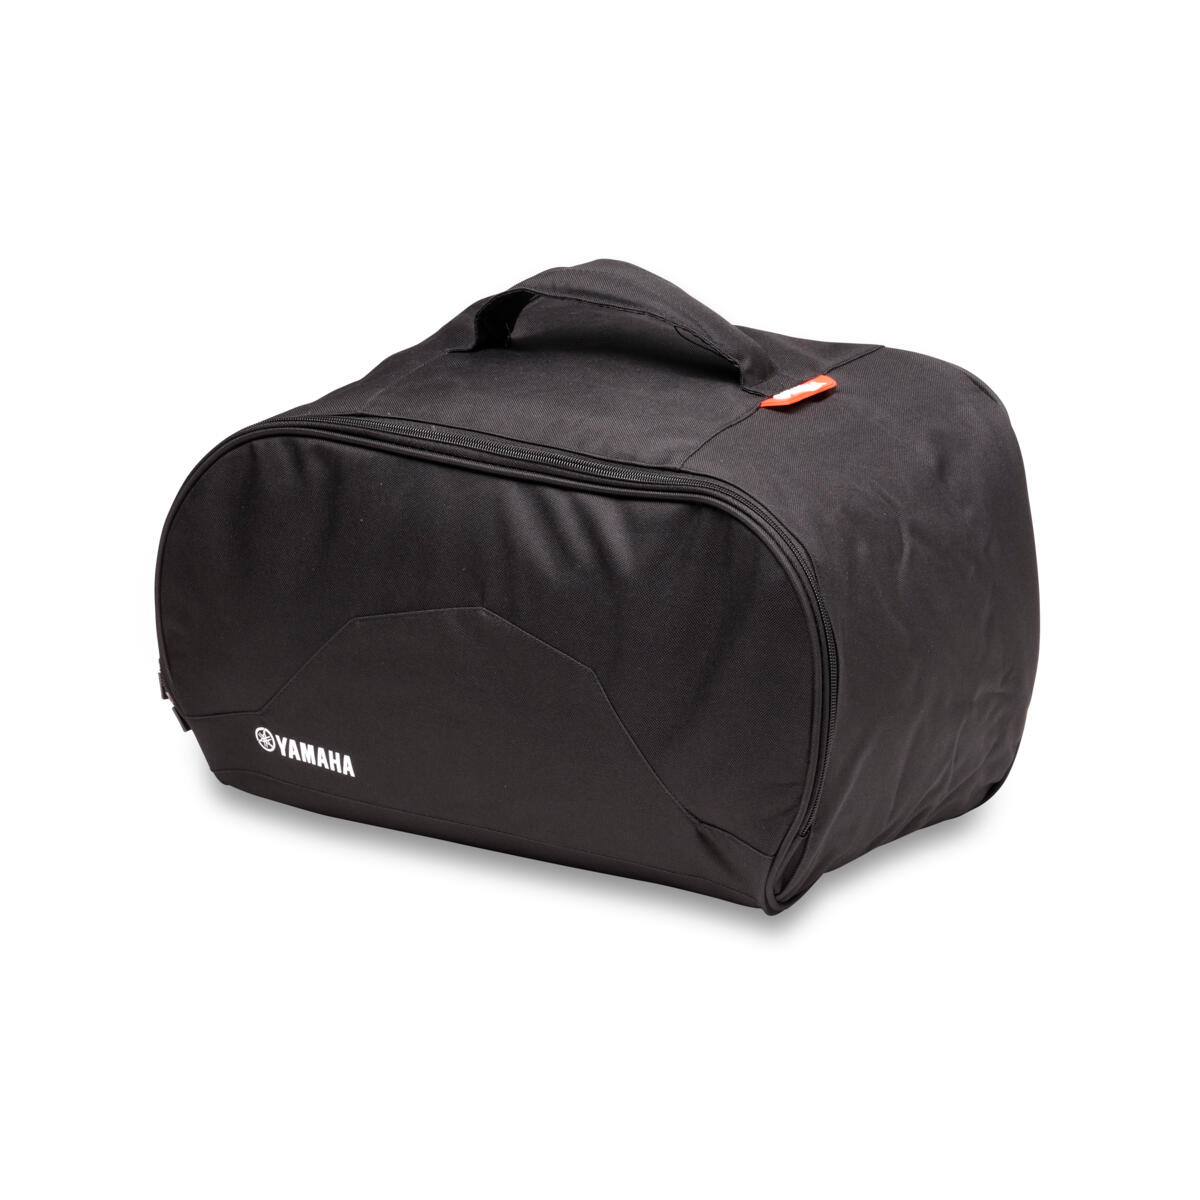 Fitted soft bag to put inside the optional Yamaha 39L Top Case.